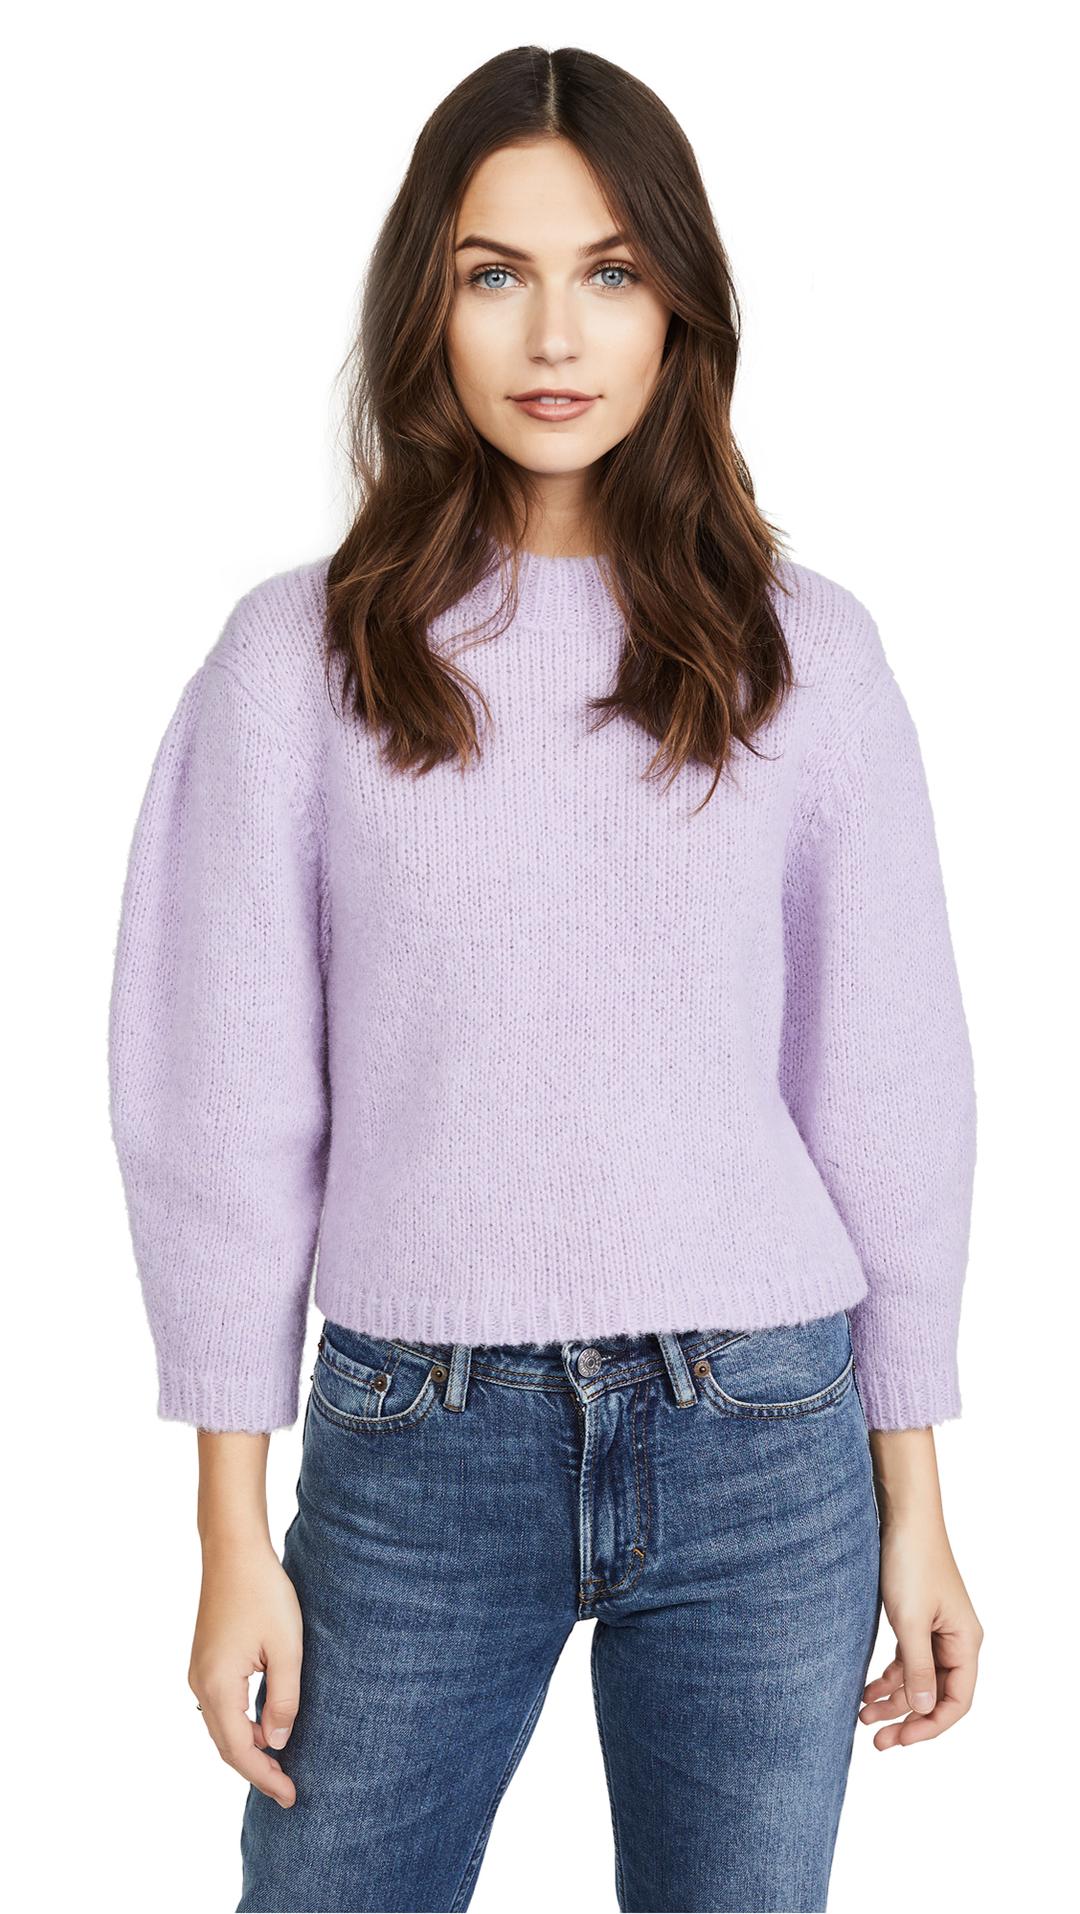 The Best Lavender-Colored Outfits | Who What Wear